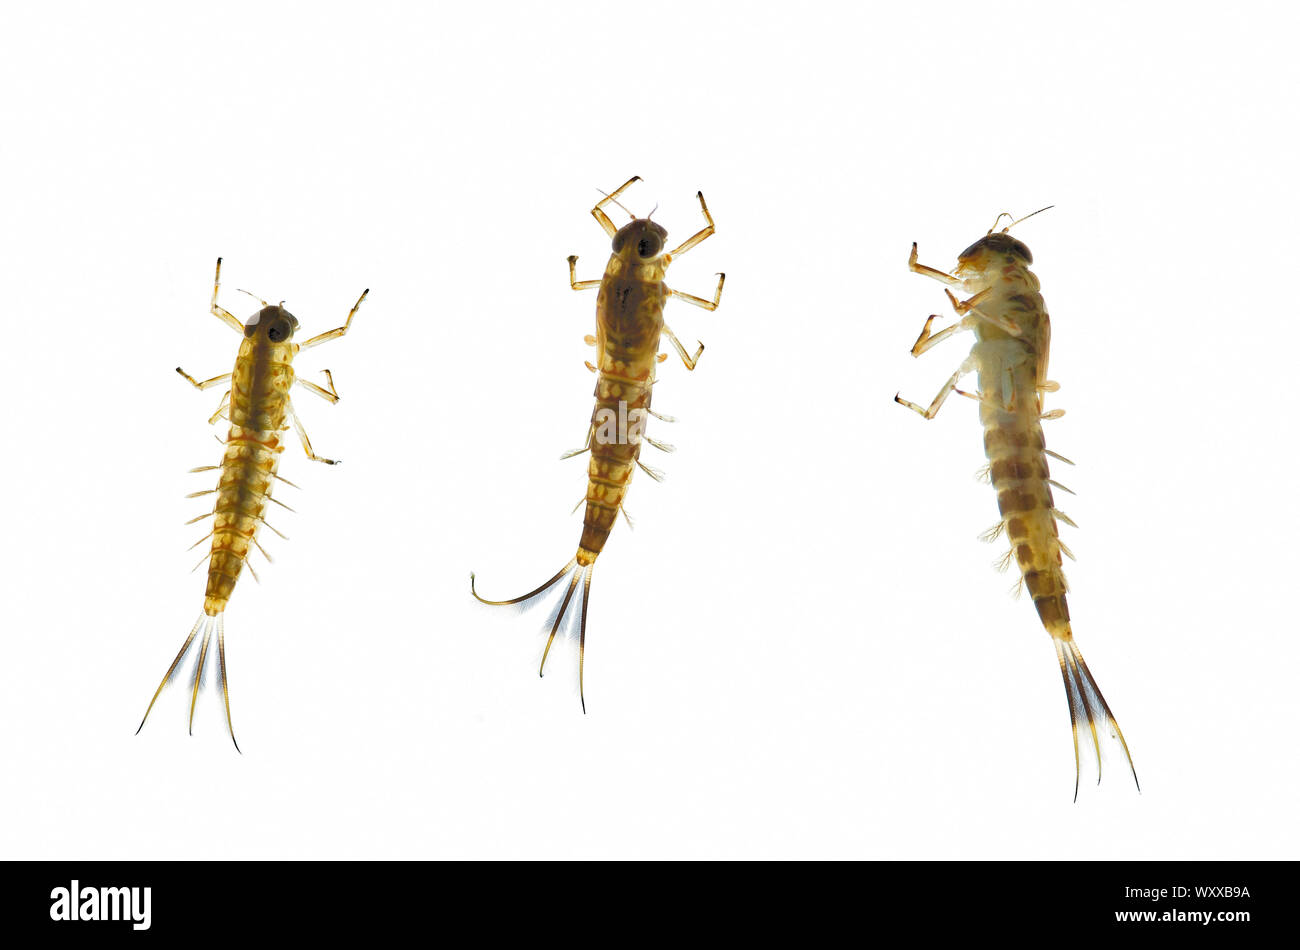 Larval or nymphal stage (aquatic) of Ameletid Minnow Mayflies, Shasta County, California, USA Stock Photo